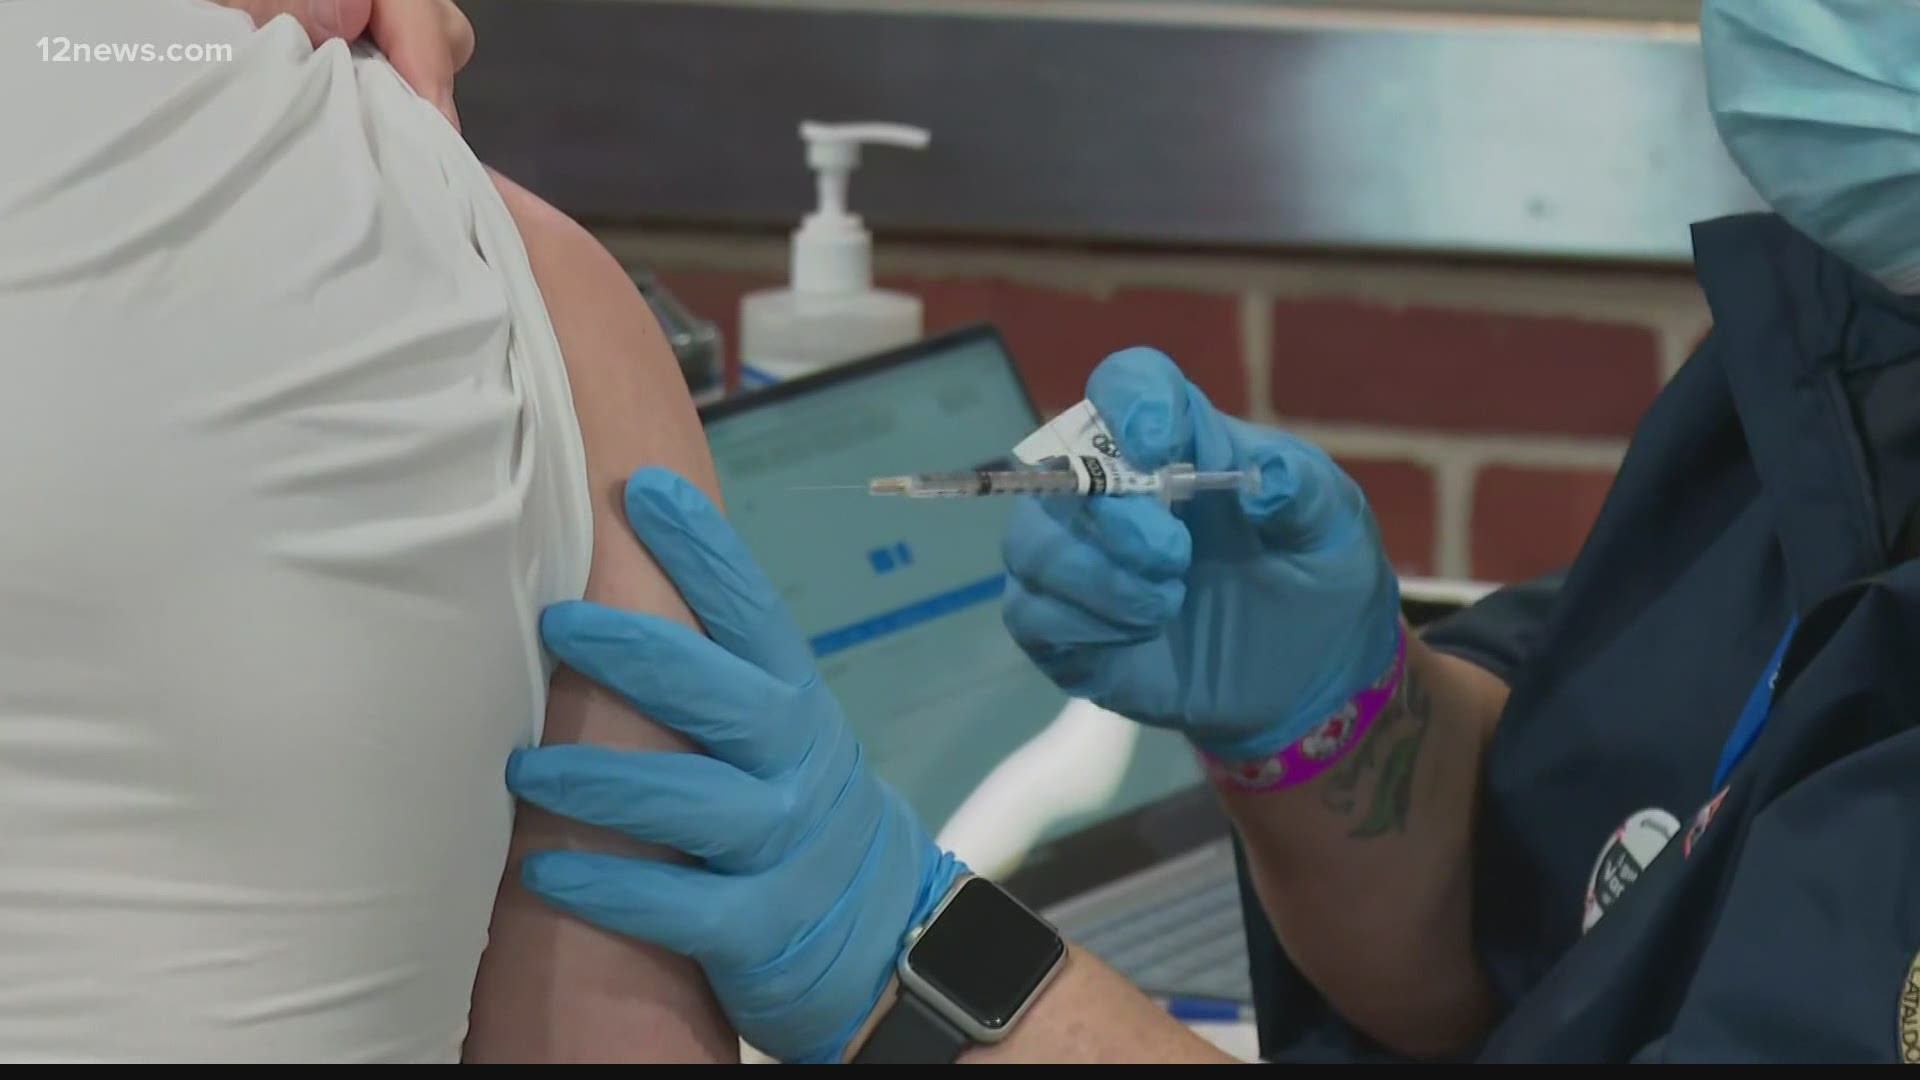 COVID-19 cases are on the rise in Arizona. 900 new COIVD cases were reported after the holiday weekend. Health officials are urging people to get vaccinated.